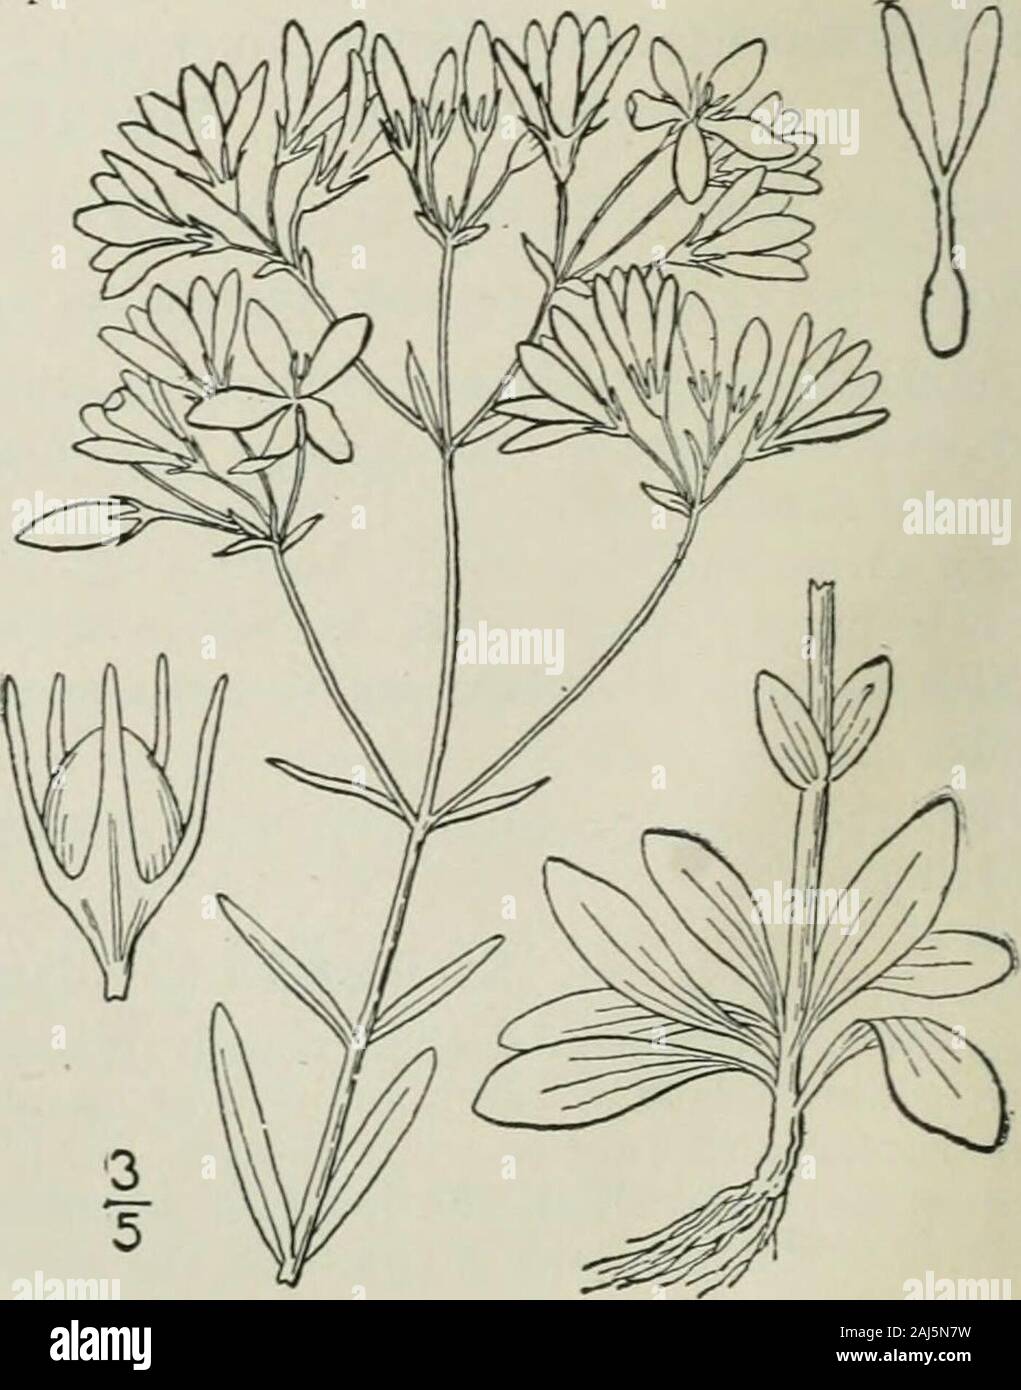 An illustrated flora of the northern United States, Canada and the British possessions : from Newfoundland to the parallel of the southern boundary of Virginia and from the Atlantic Ocean westward to the 102nd meridian . In dry or moist soil, Virginia to Florida.Sept.. Genus 2. GENTIAN FA^IILY. 3. Sabbatia brachiata Ell. Narrow-leaved Sabbatia. Fig. 3338. Chironia angularis var. angustifolia Michx. Fl. Bor. Am. i : 146. 1803.S. brachiata Ell. Bot. S. C. & Ga. i : 2S4. 1S17.S. angustifolia Britton, Mem. Torr. Club 5 : 259. 1894. Stem slender, branched above, slightly 4-angled, i°-2° high, the b Stock Photo